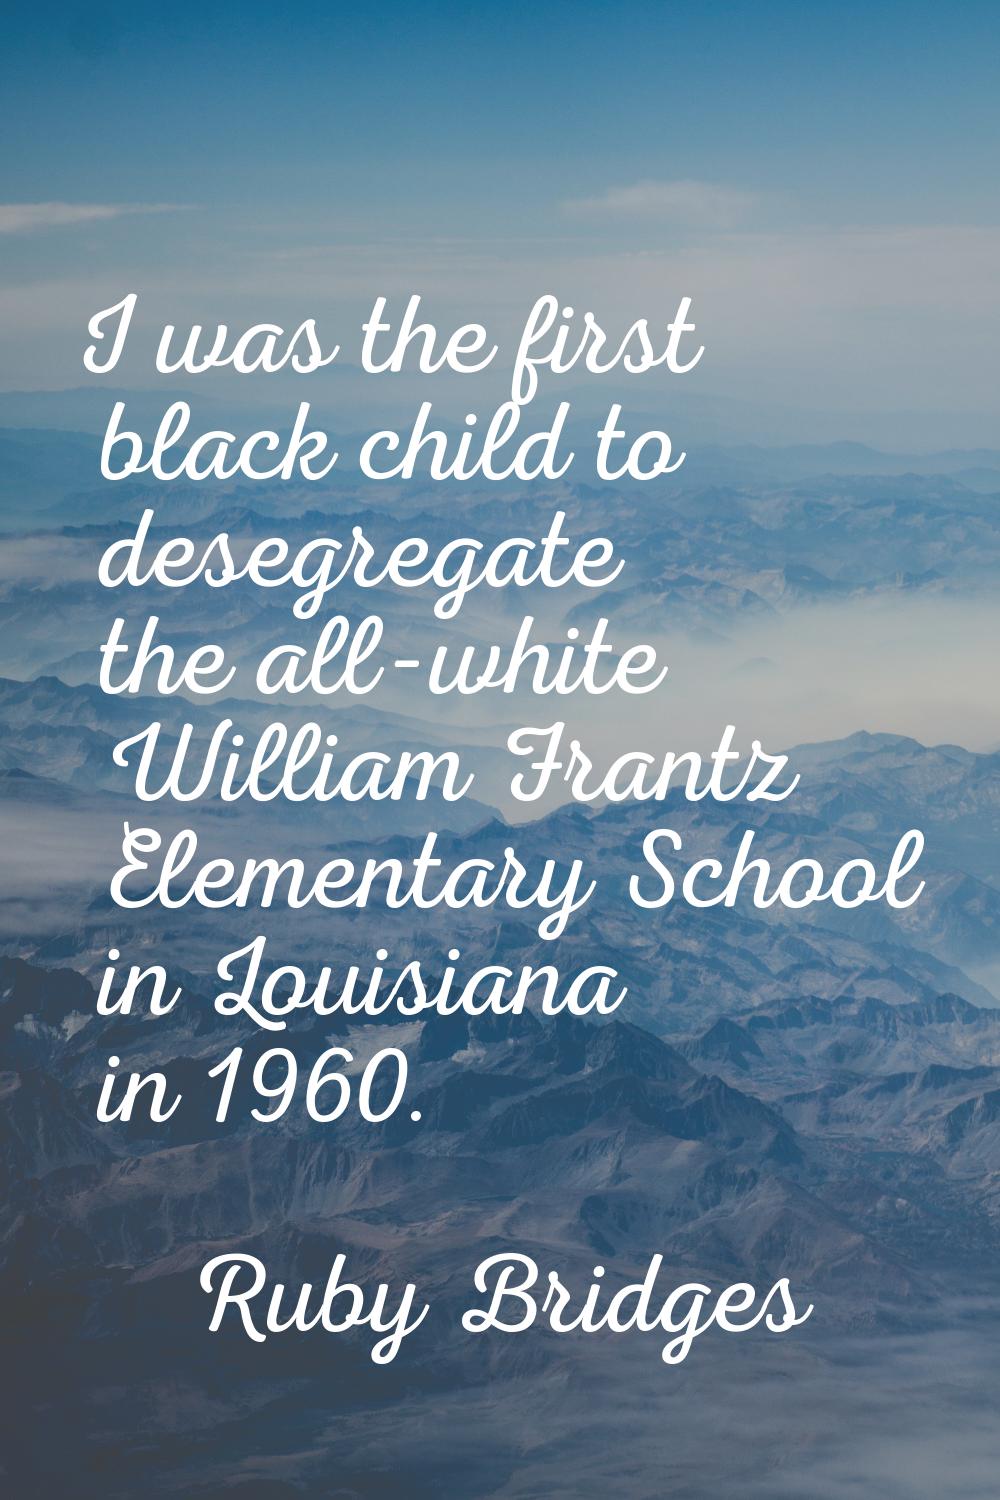 I was the first black child to desegregate the all-white William Frantz Elementary School in Louisi